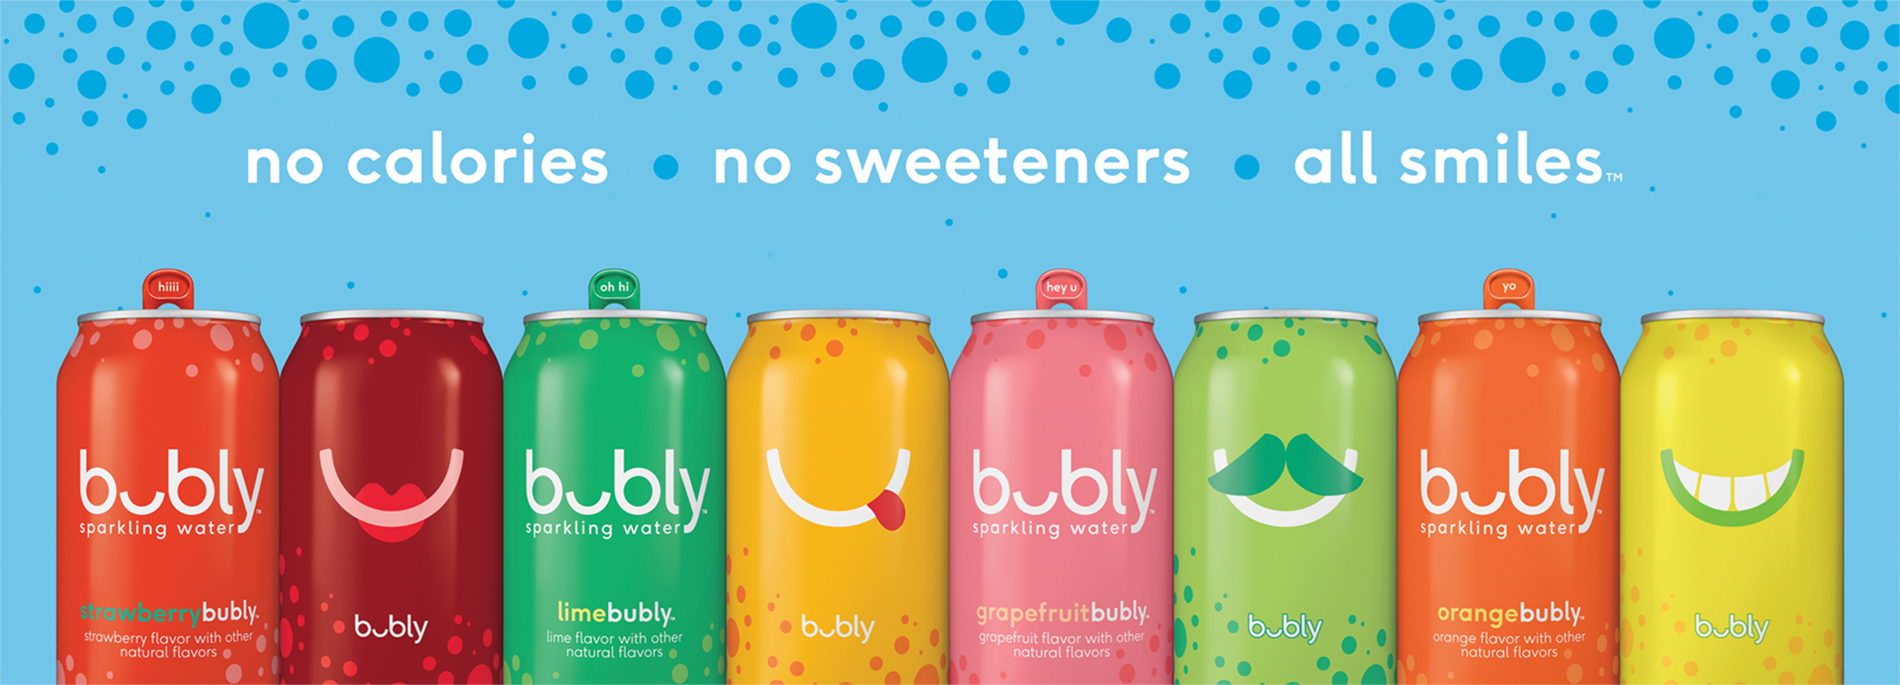 Introducing bubly: No calories, No sweeteners, All smiles.